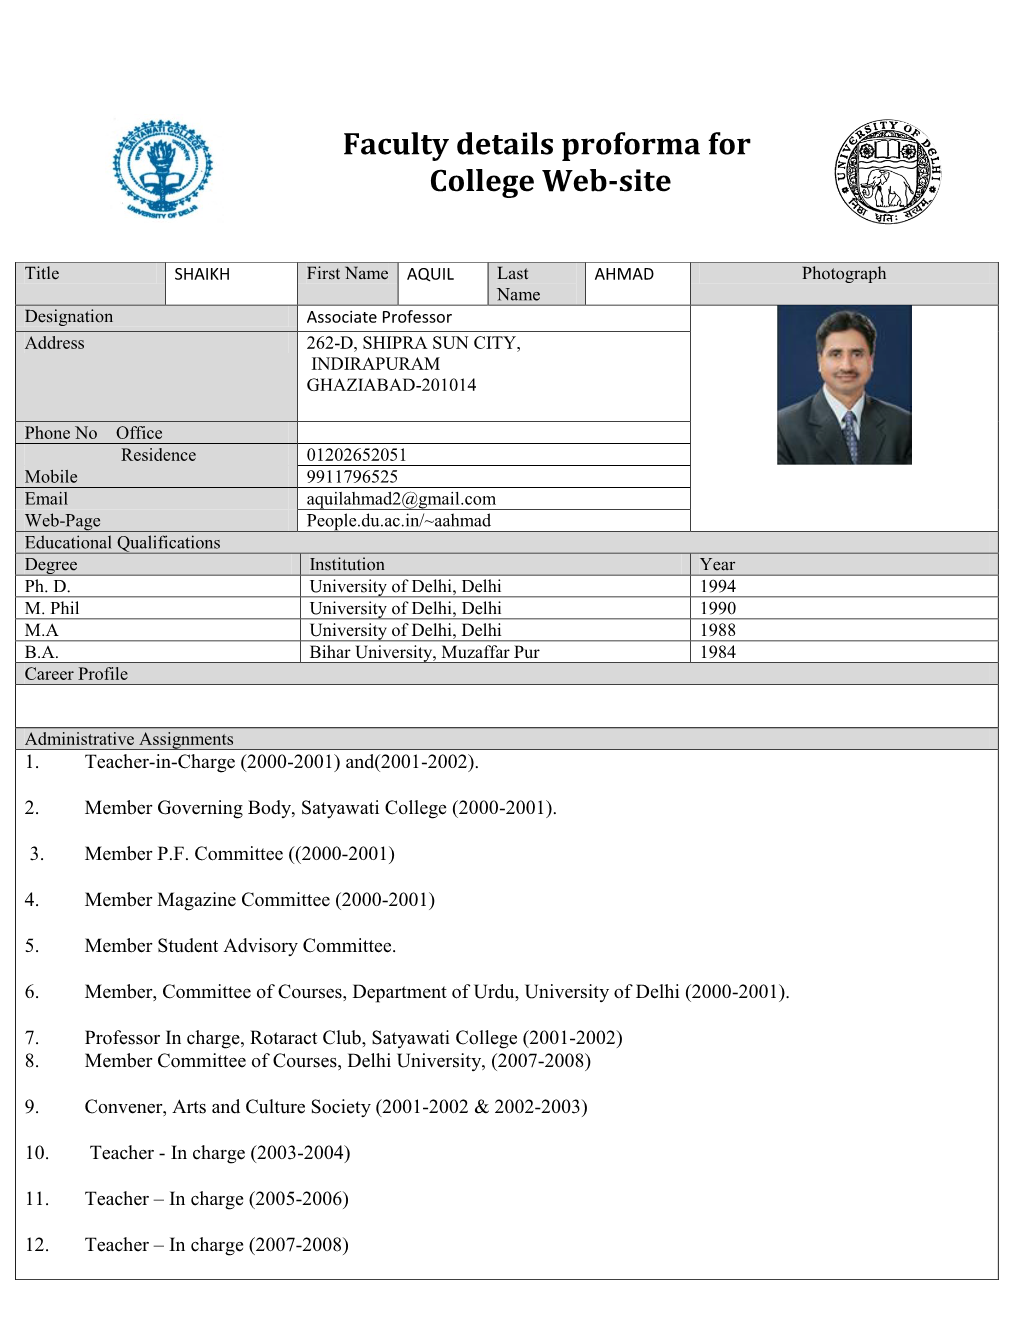 Faculty Details Proforma for College Web-Site